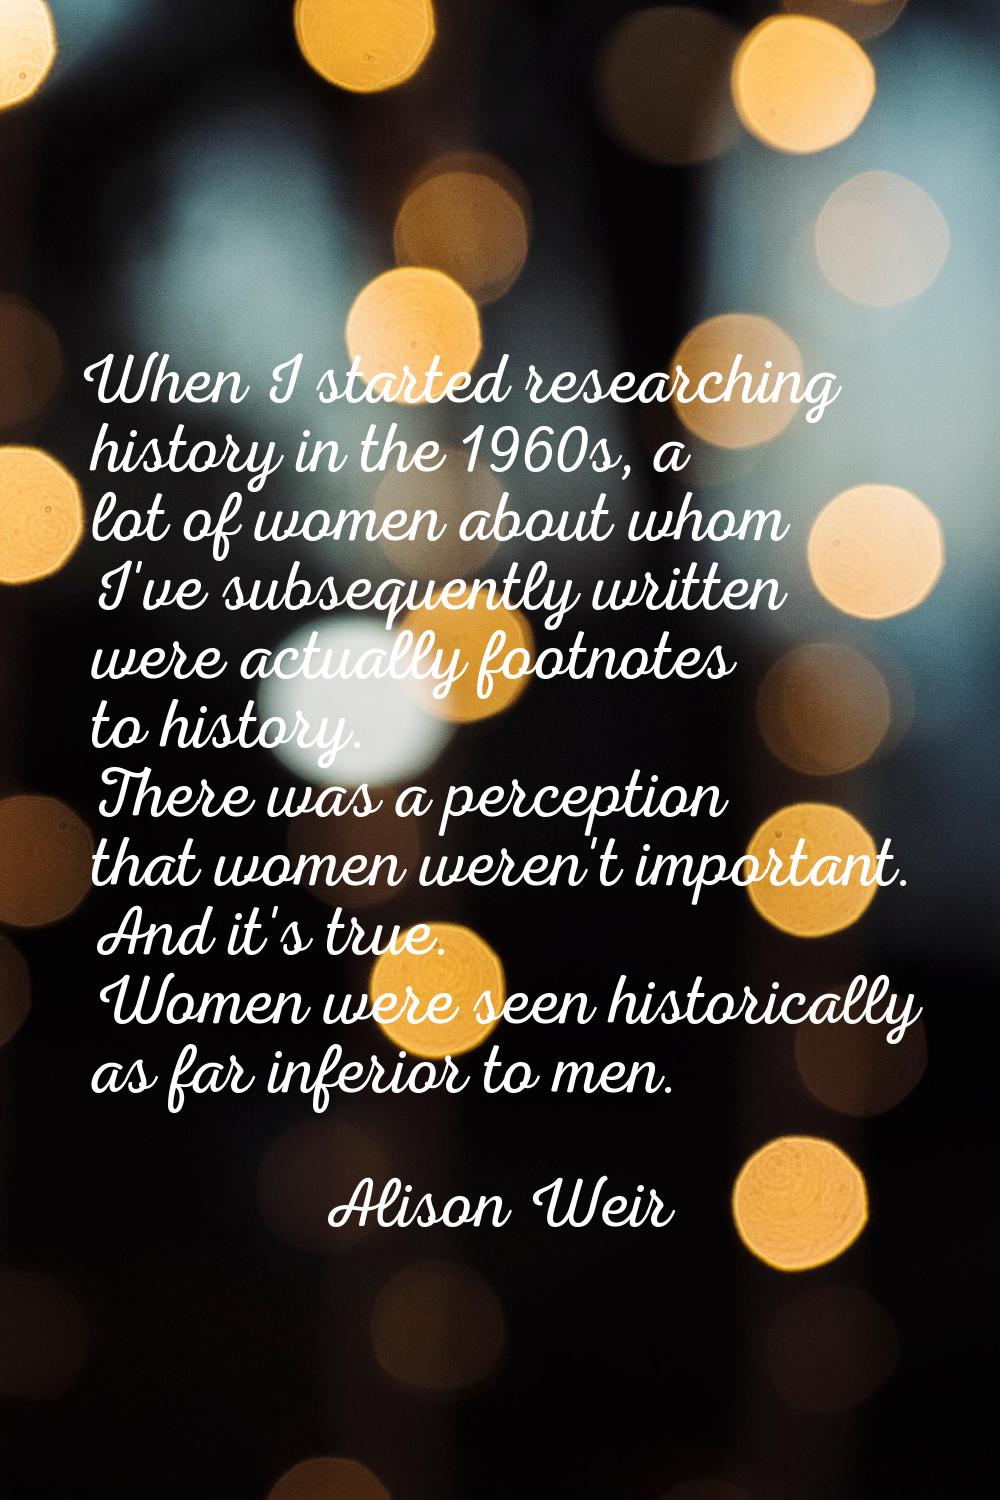 When I started researching history in the 1960s, a lot of women about whom I've subsequently writte